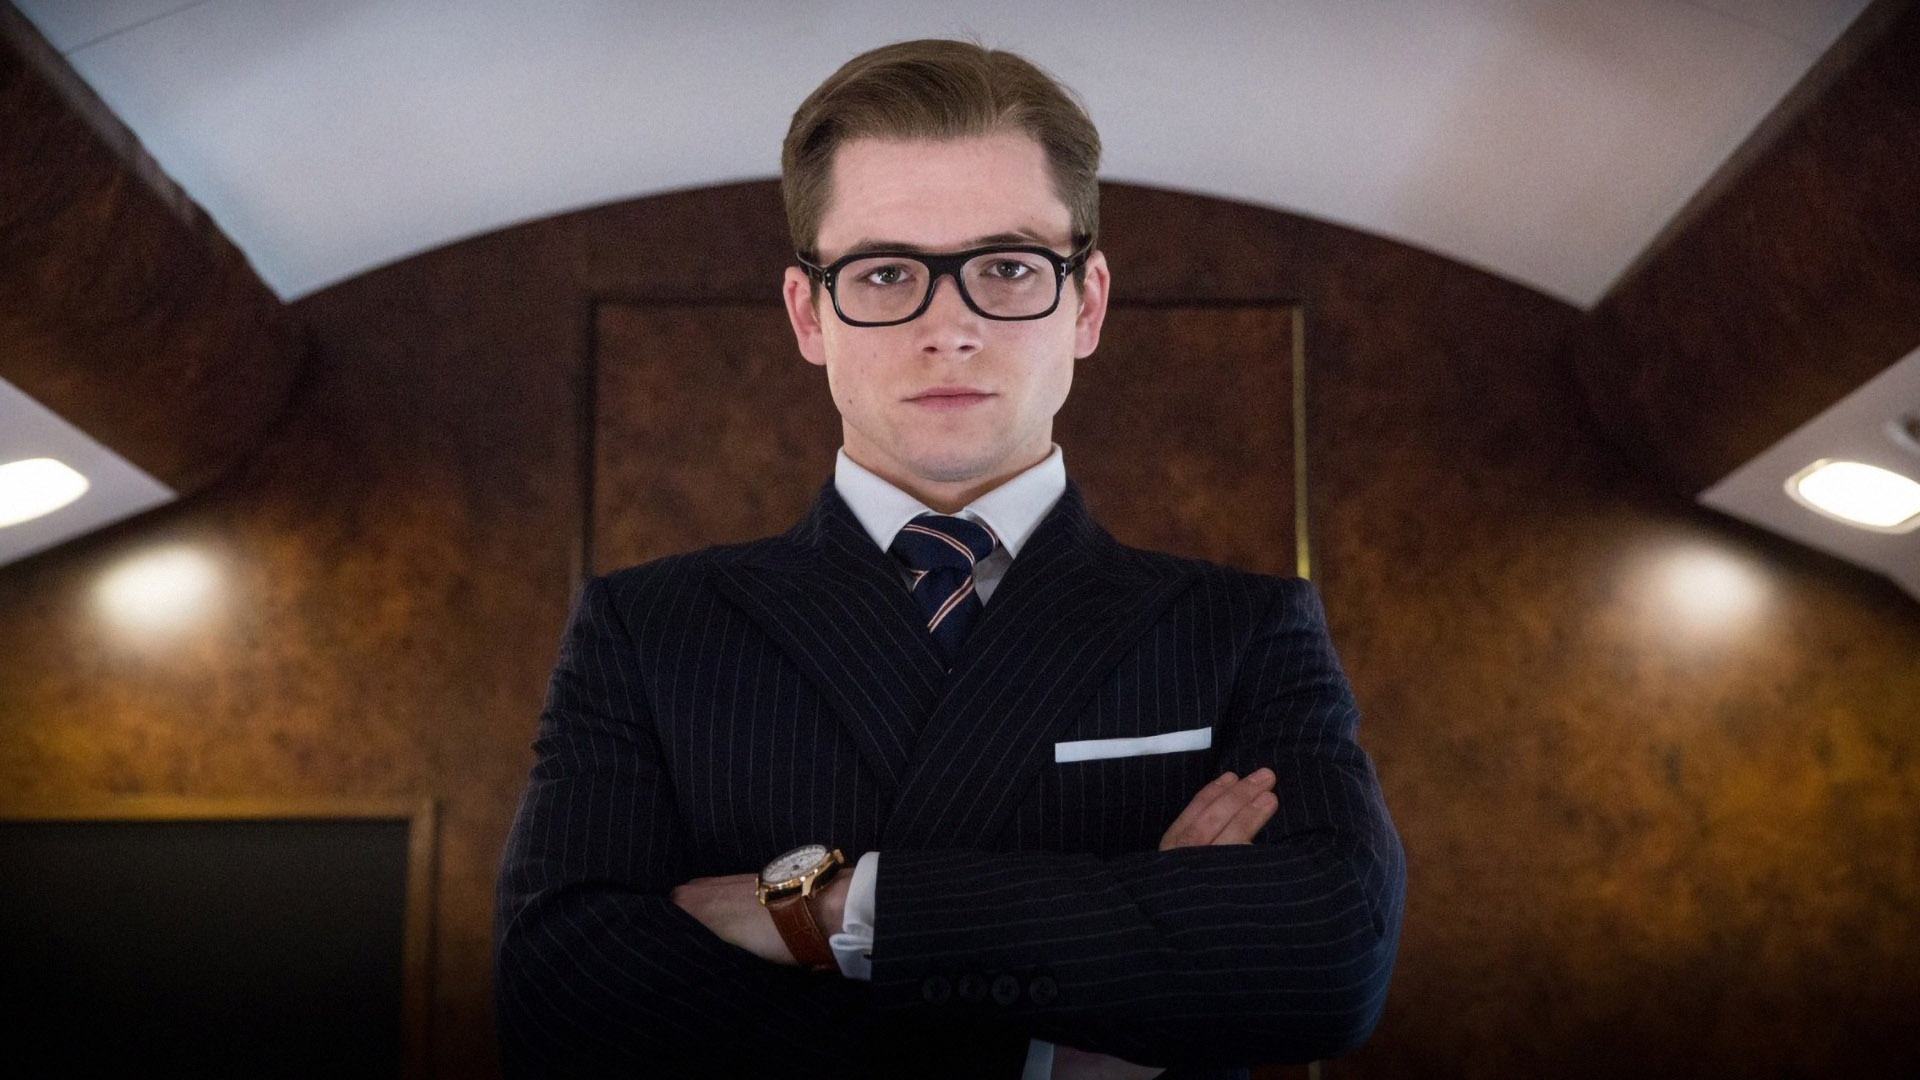 Start Waiting: Kingsman 3 Officially Confirmed (Do We Need It, Though?)